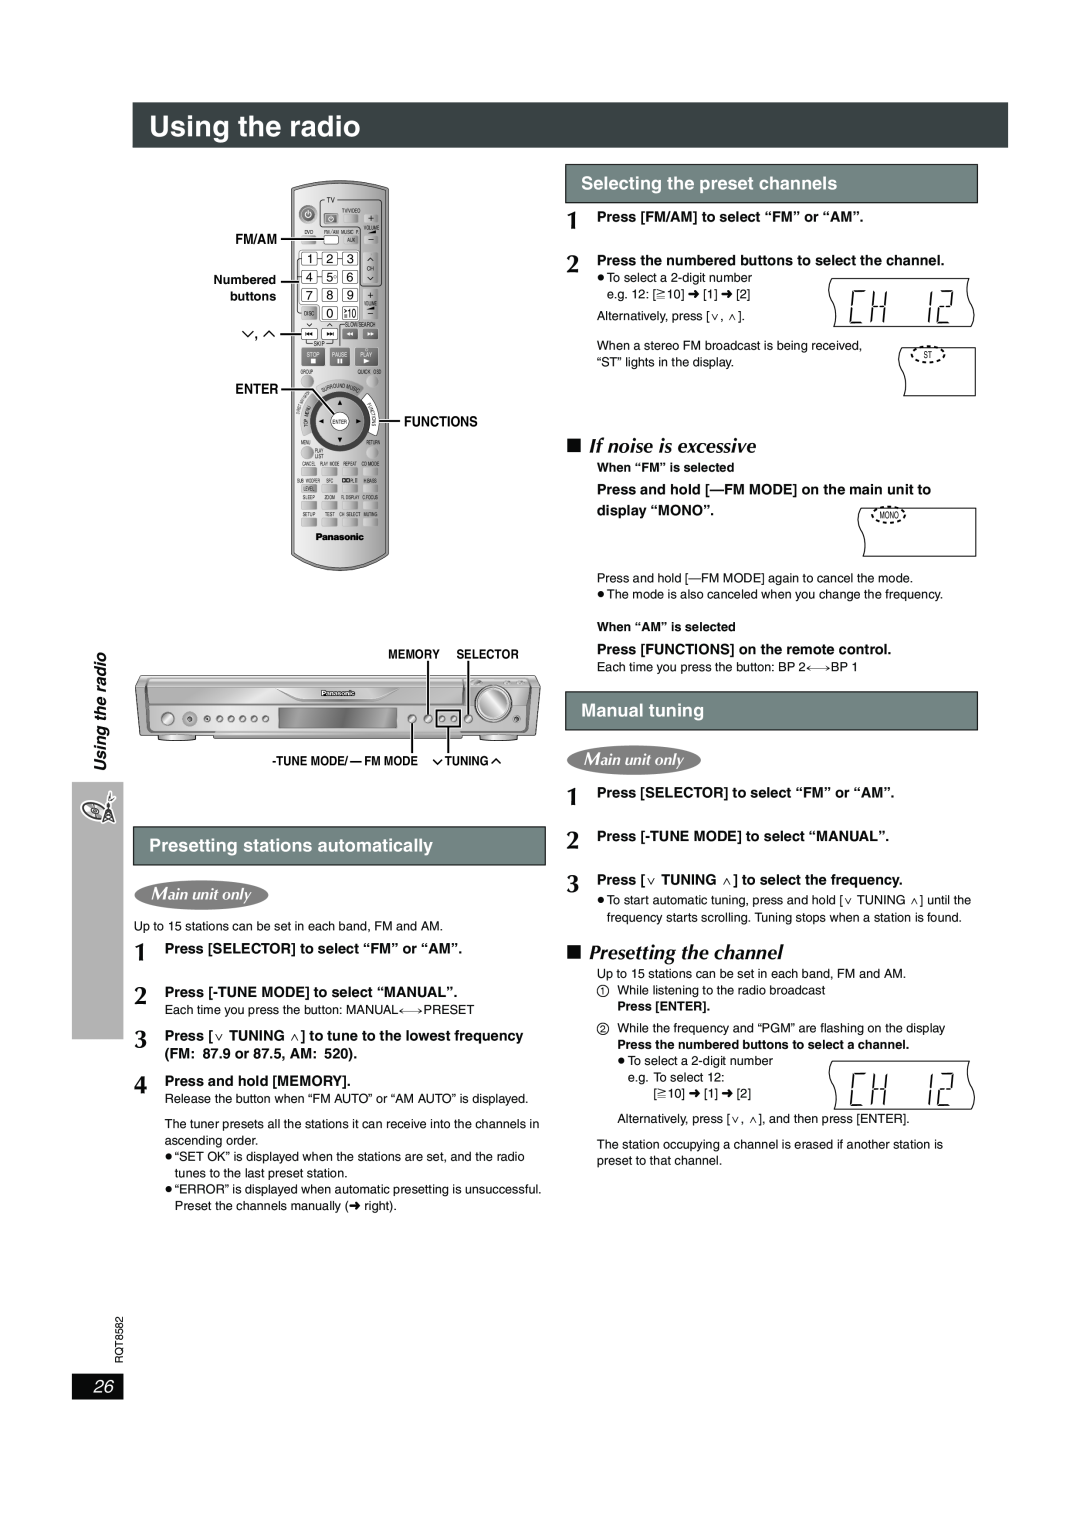 Panasonic SC-HT740 Using the radio, If noise is excessive, Presetting the channel, Presetting stations automatically 